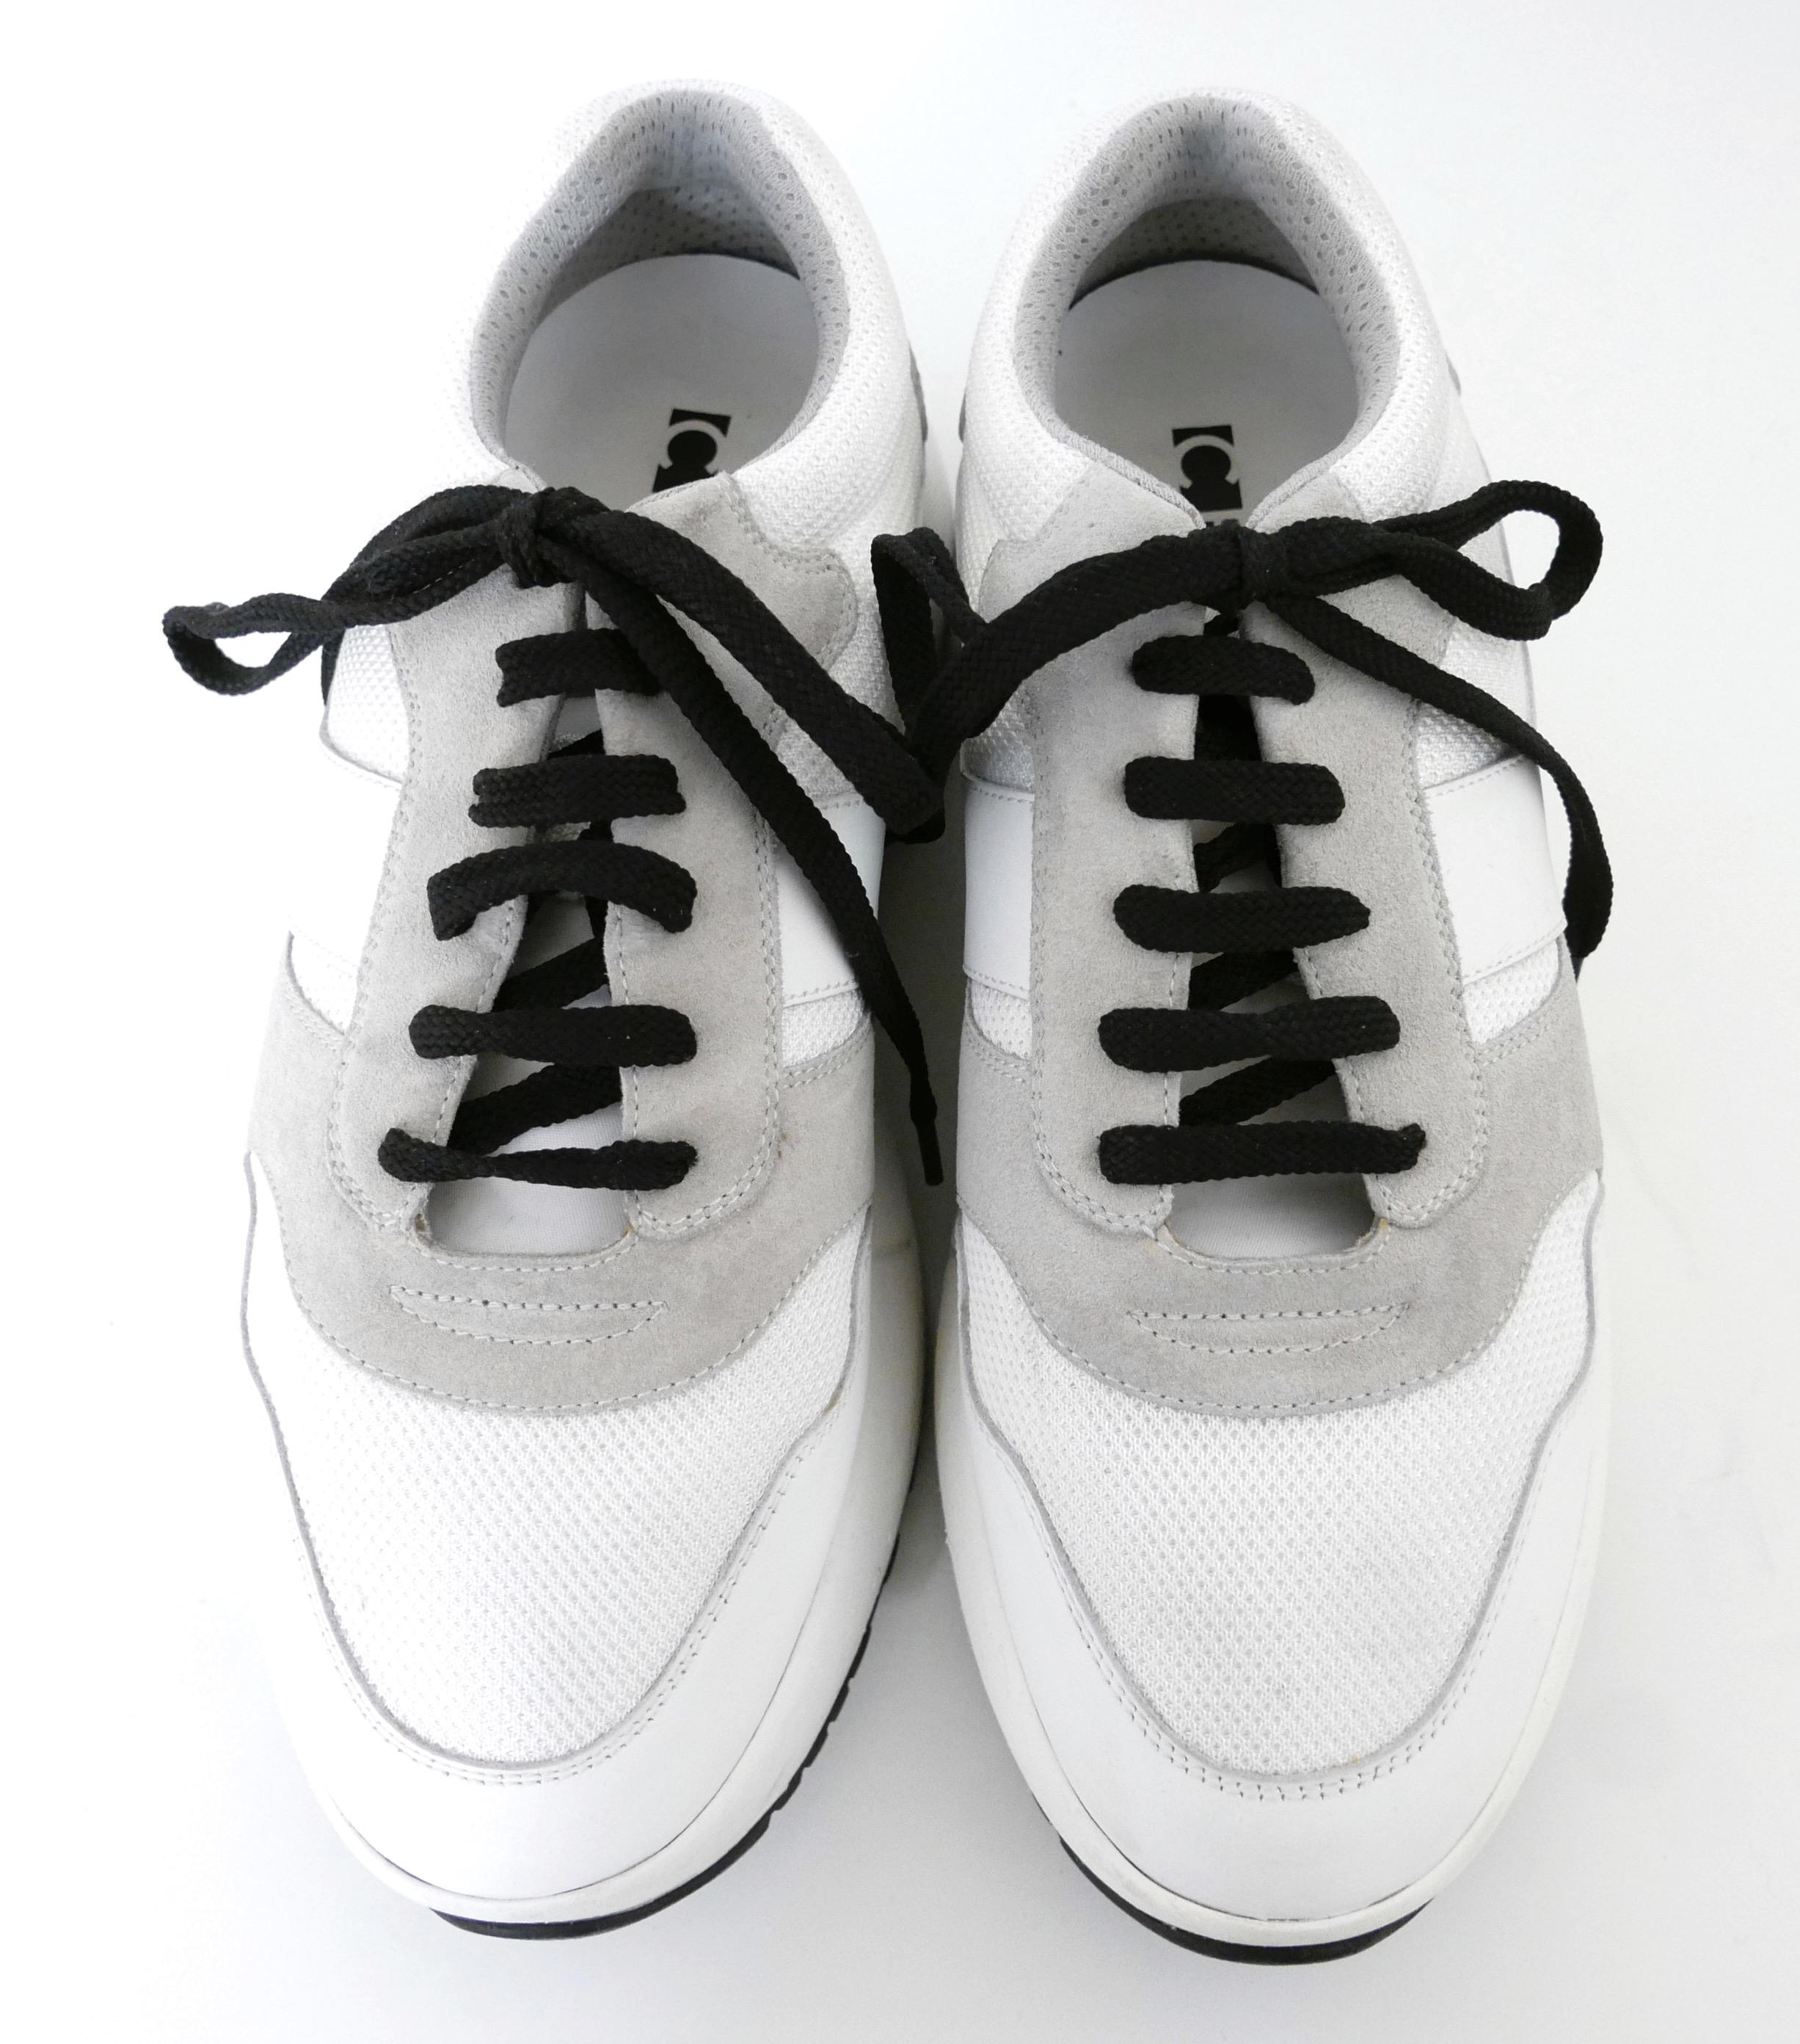 Cult Celine Delivery' trainers from the Celine SS18 collection by Phoebe Philo. 

Worn once 

Made from white leather, off white and taupe leather and suede with deep platforms, almond shaped toe, Lace-up fastening, 
a black rubber sole and